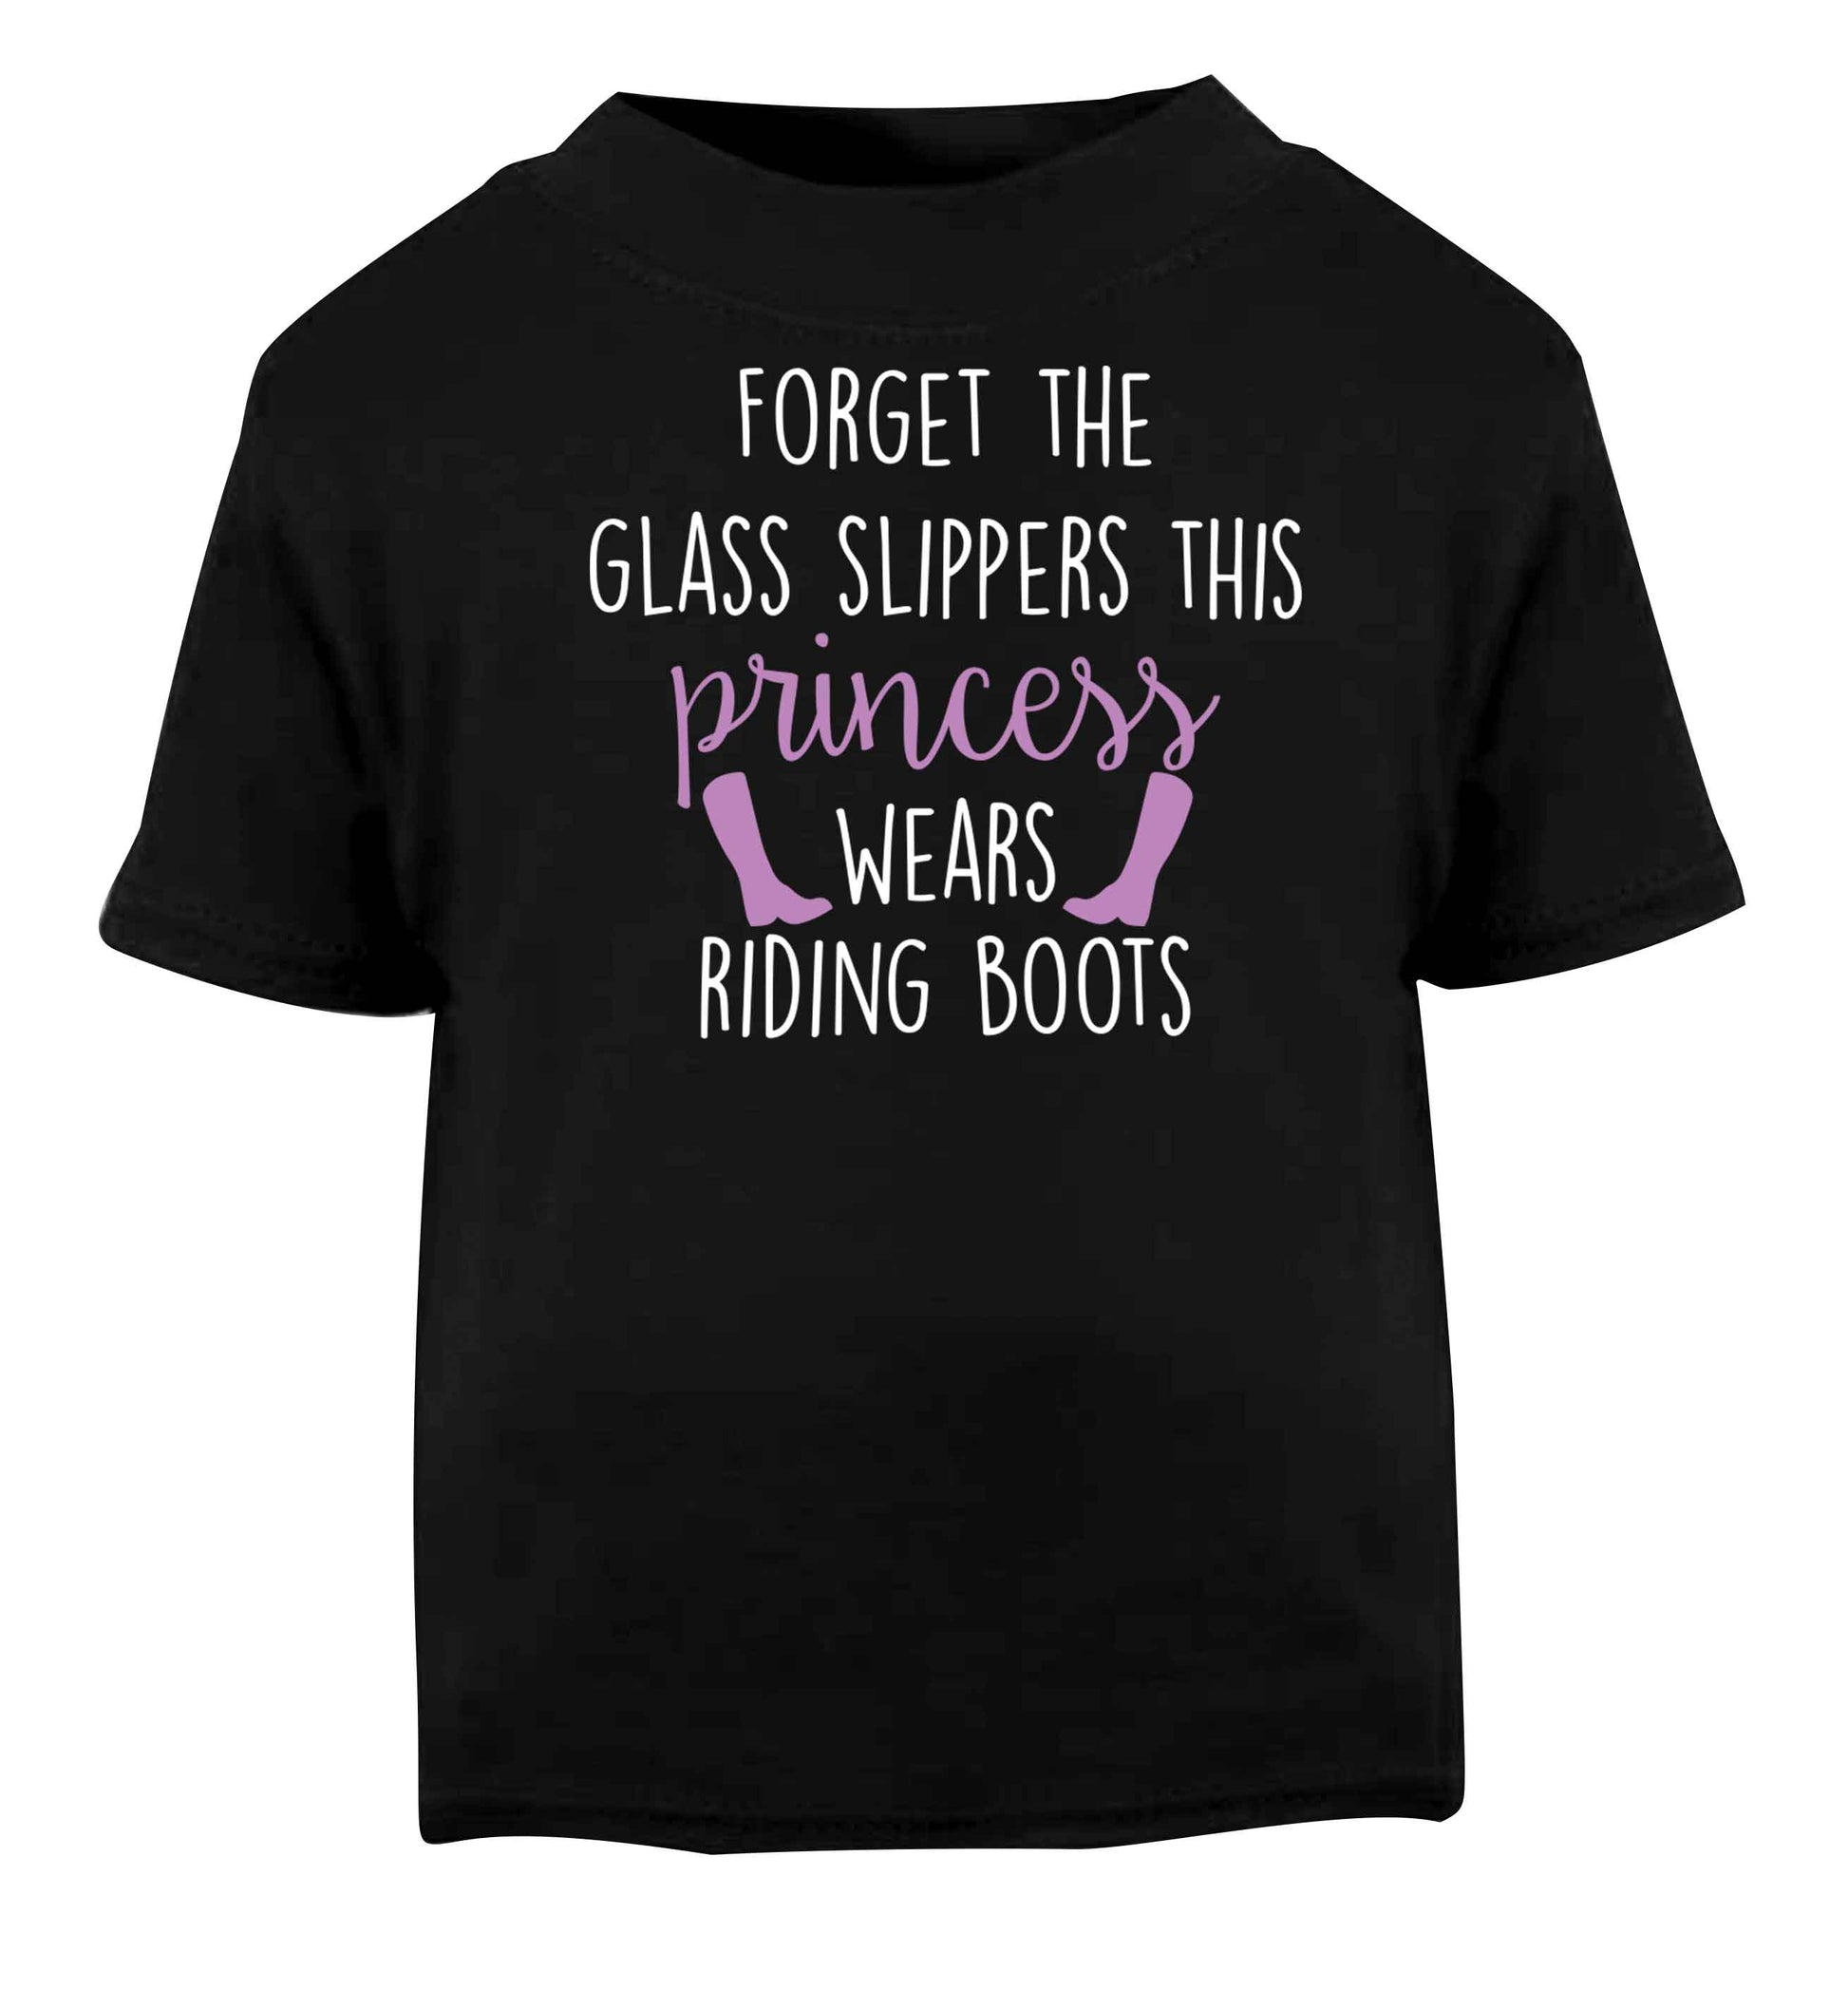 Forget the glass slippers this princess wears riding boots Black baby toddler Tshirt 2 years